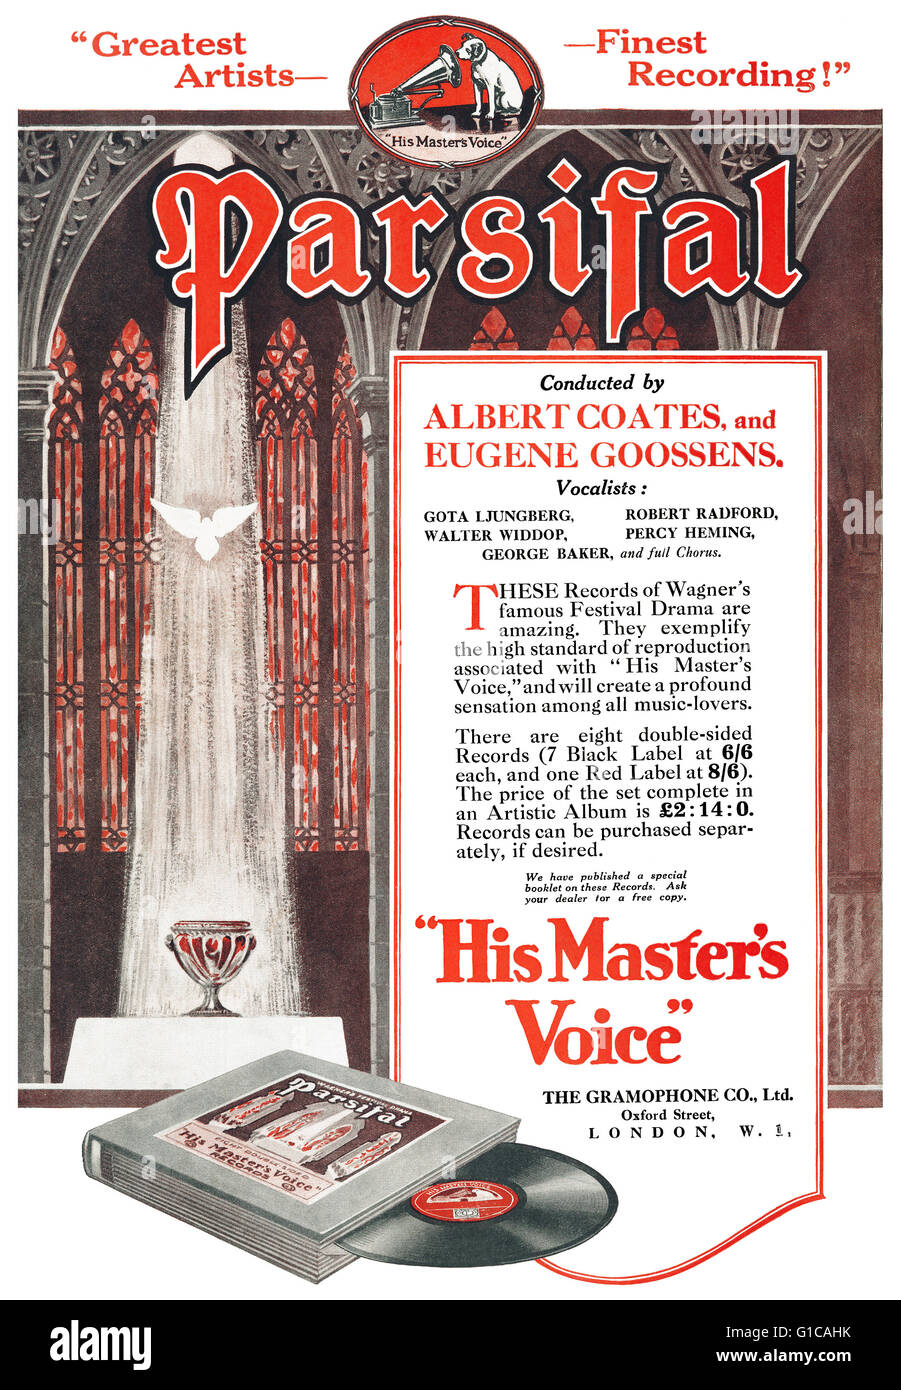 1925 UK advert for a recording of Richard Wagner's Parsifal on the His Master's Voice label. Stock Photo